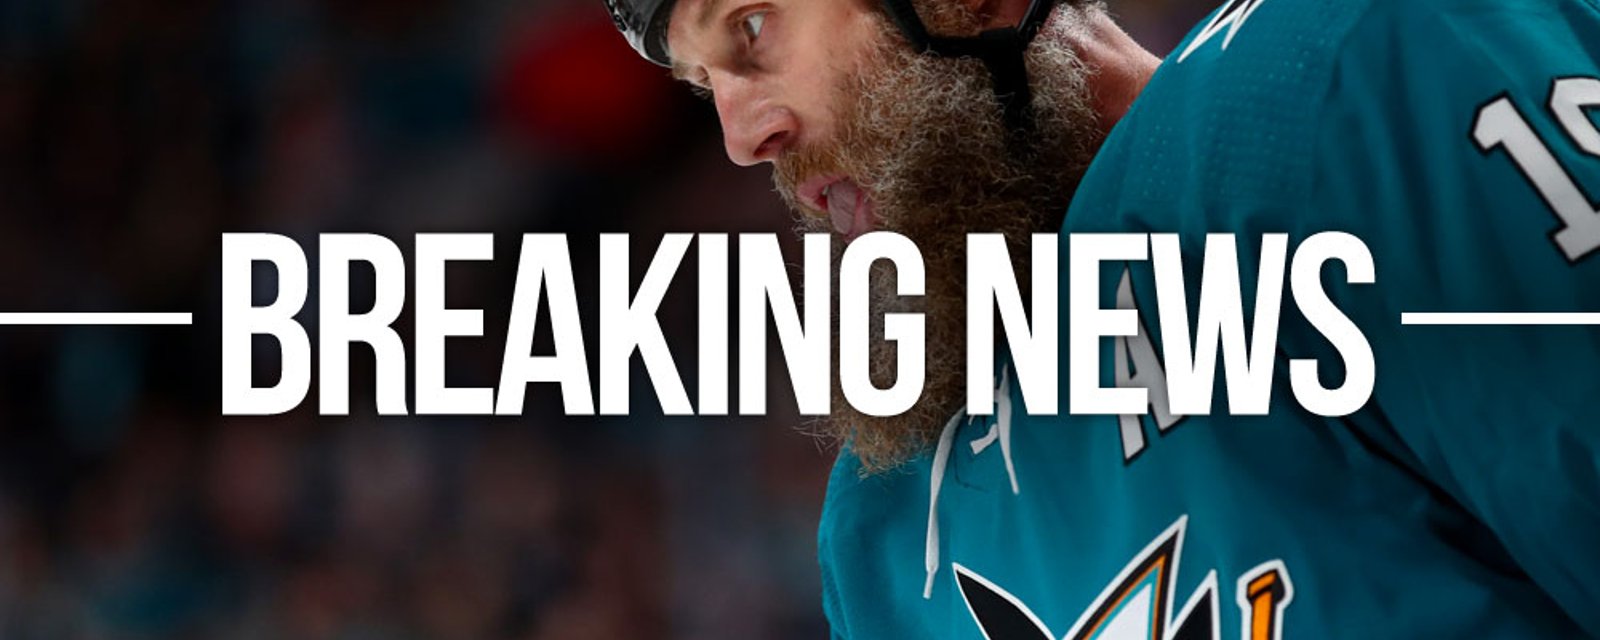 Joe Thornton has signed with the Maple Leafs! 